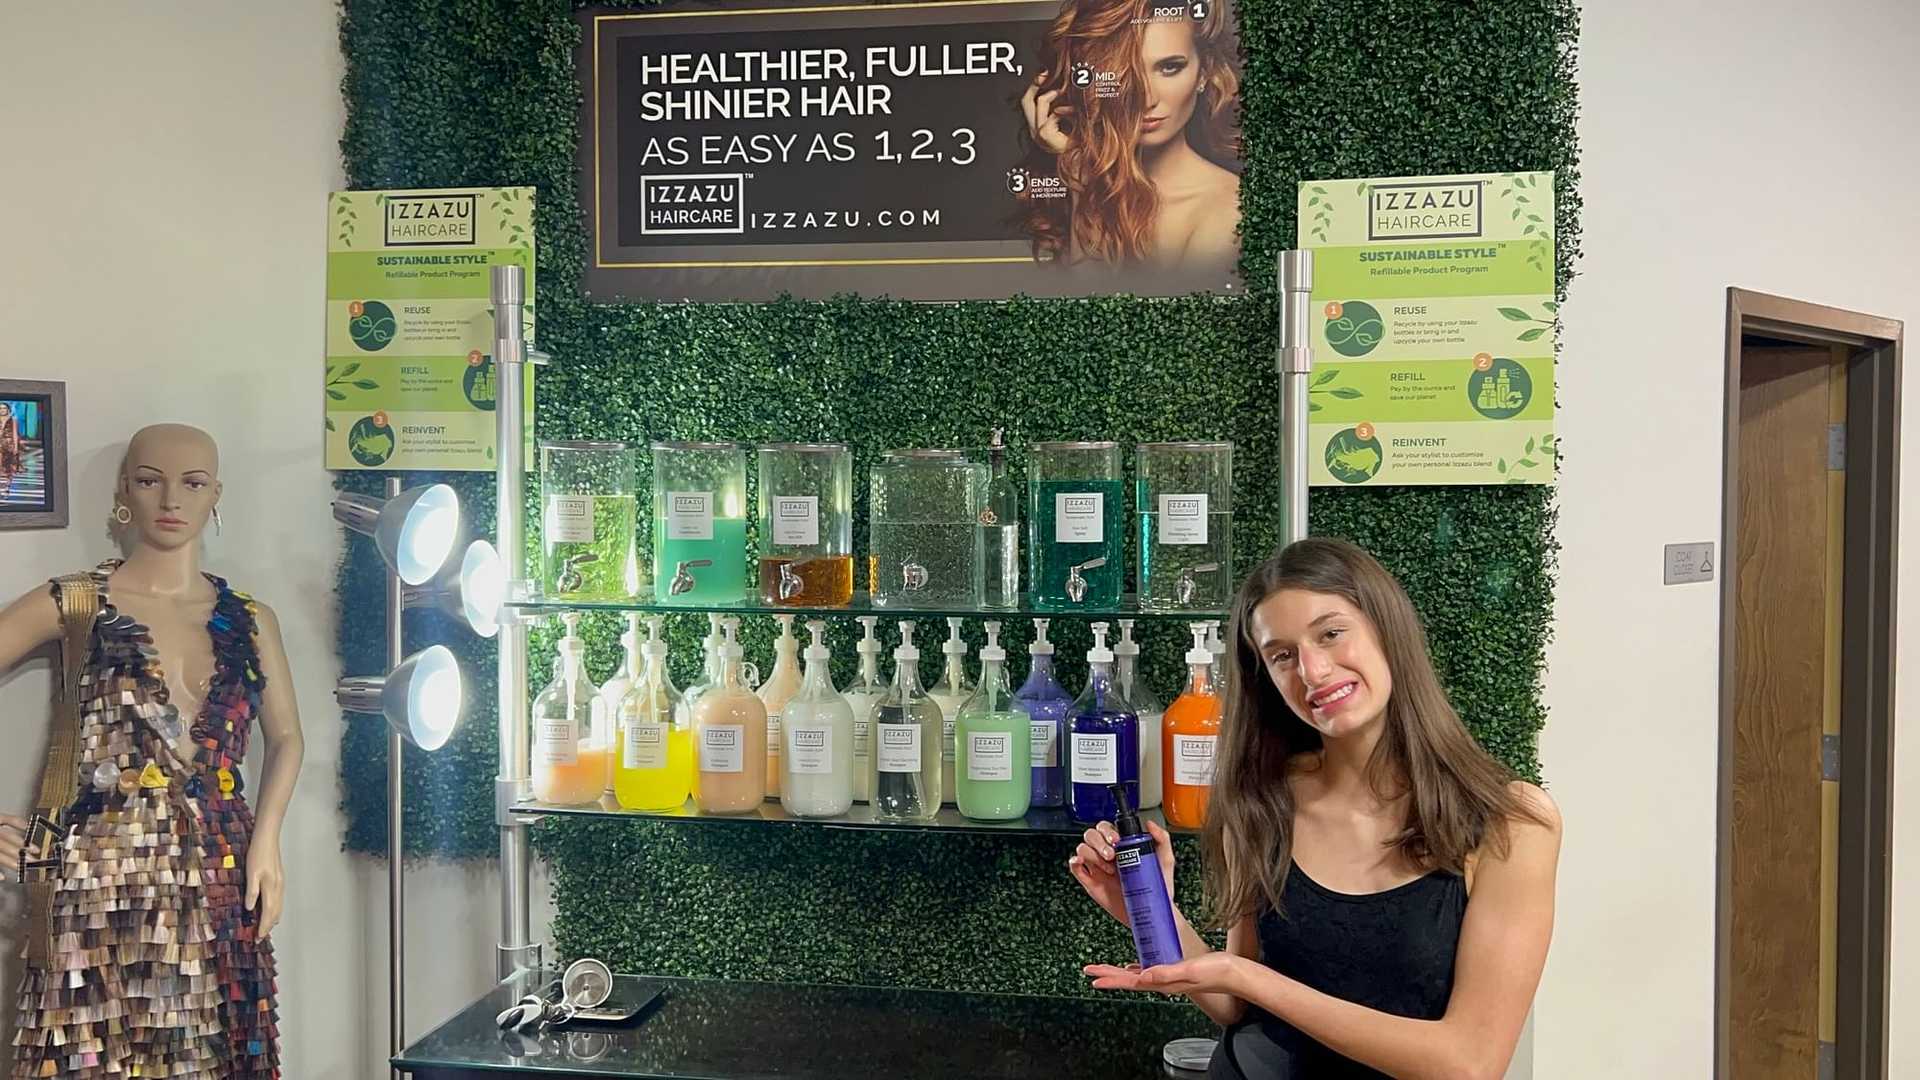 Woman holding hair product in front of store display with hair care products and promotional signage.